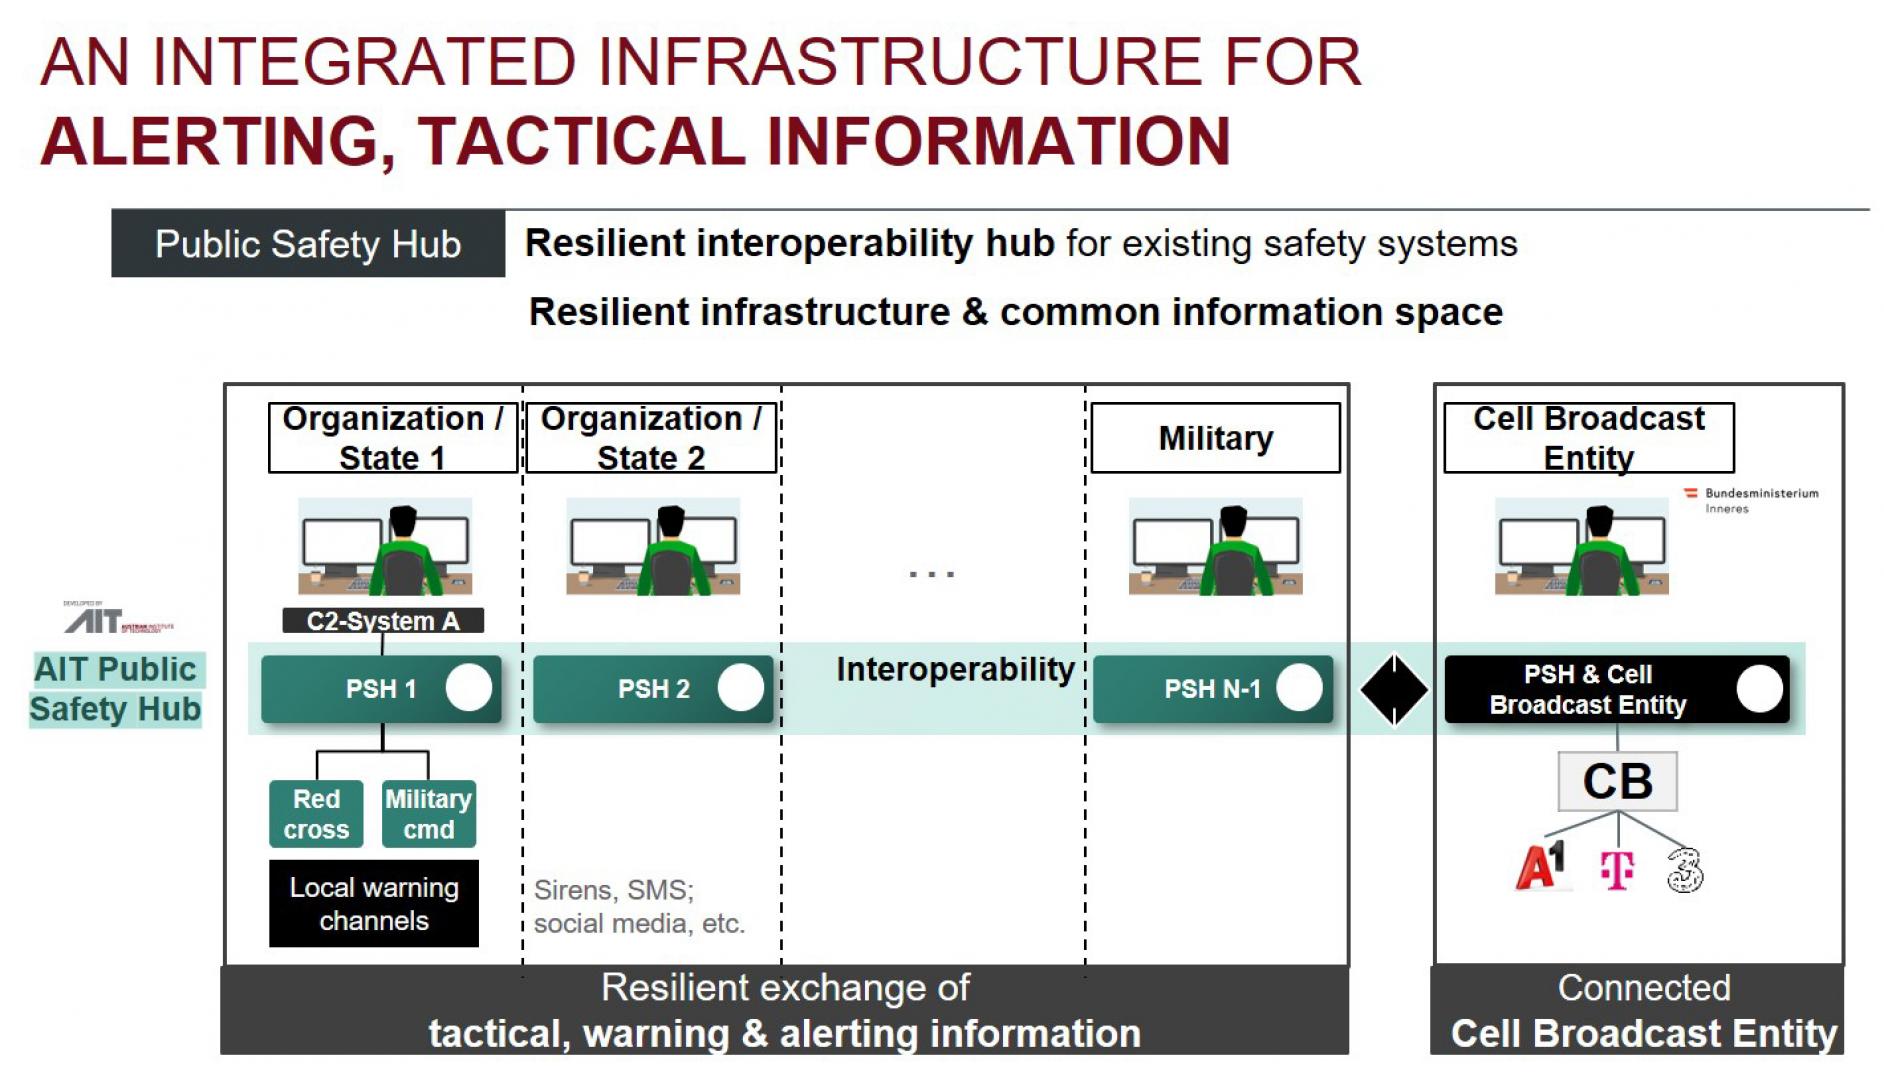 AIT Public Safety Hub Use Cases: An integrated infrastructure for alerting, tactical information